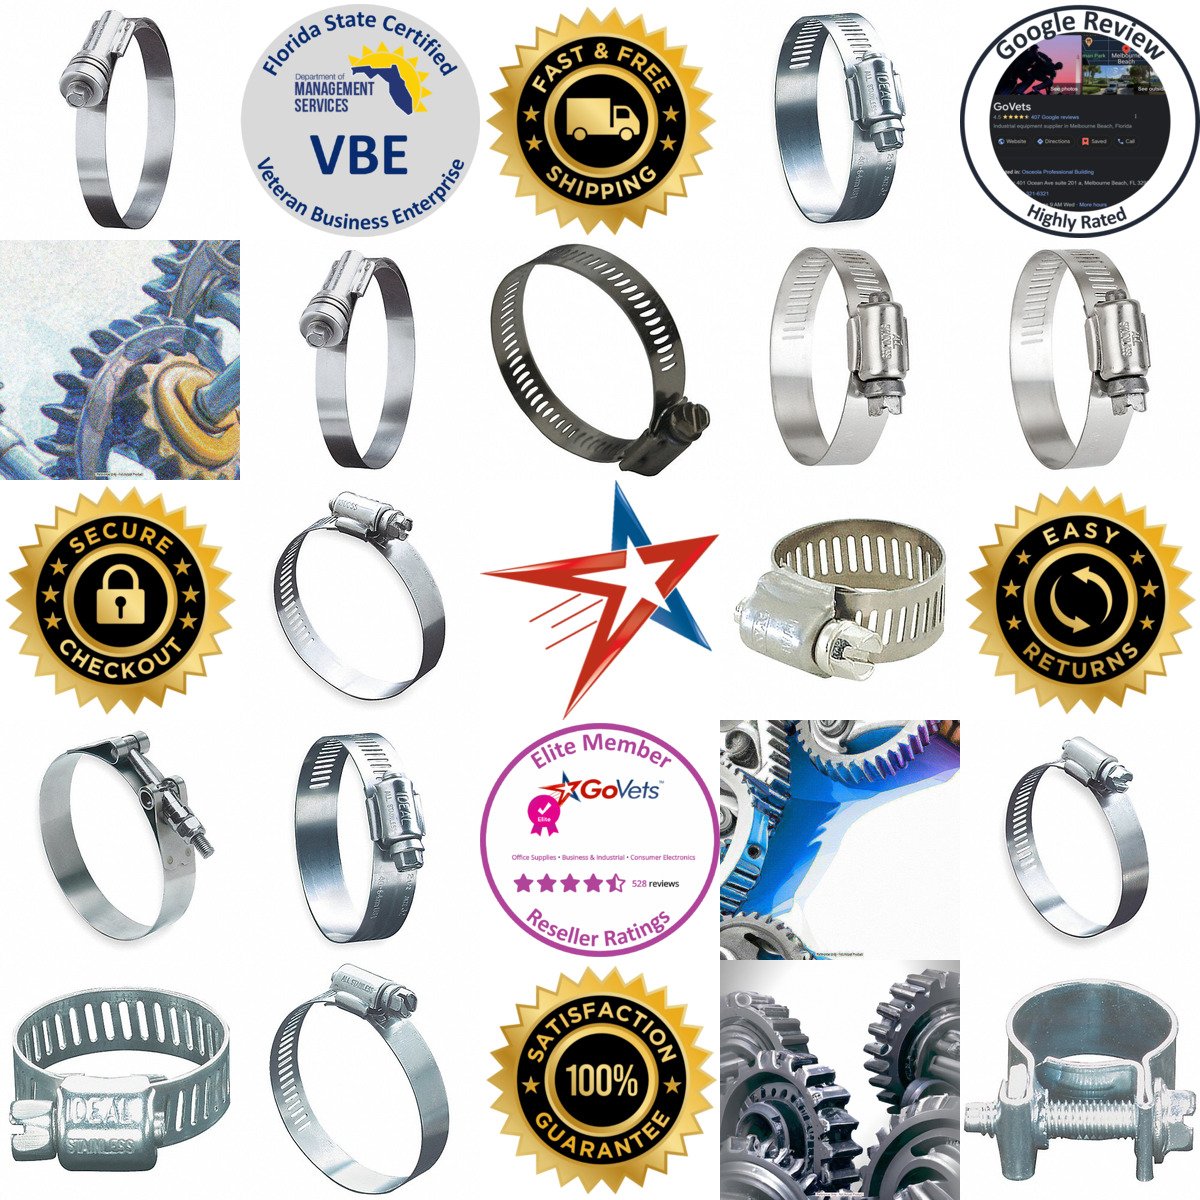 A selection of Worm Gear Clamps products on GoVets